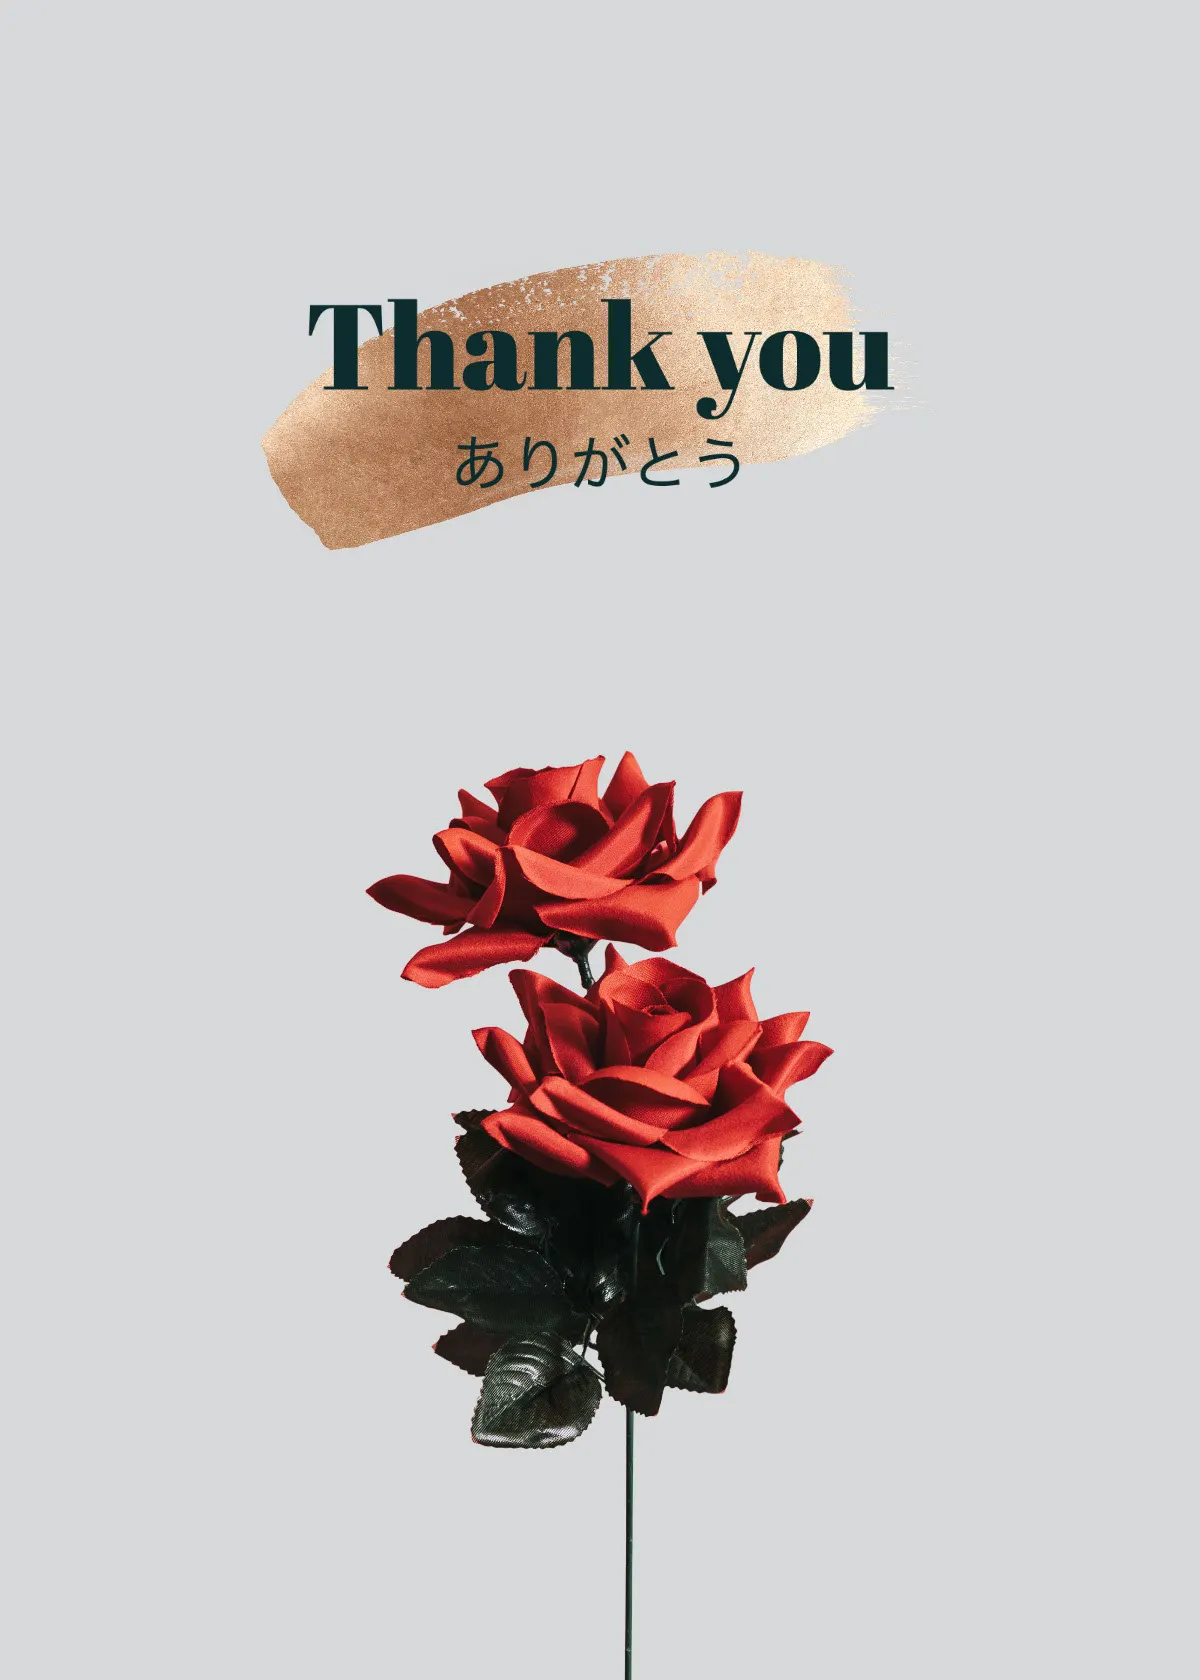 Thank you roses gray back